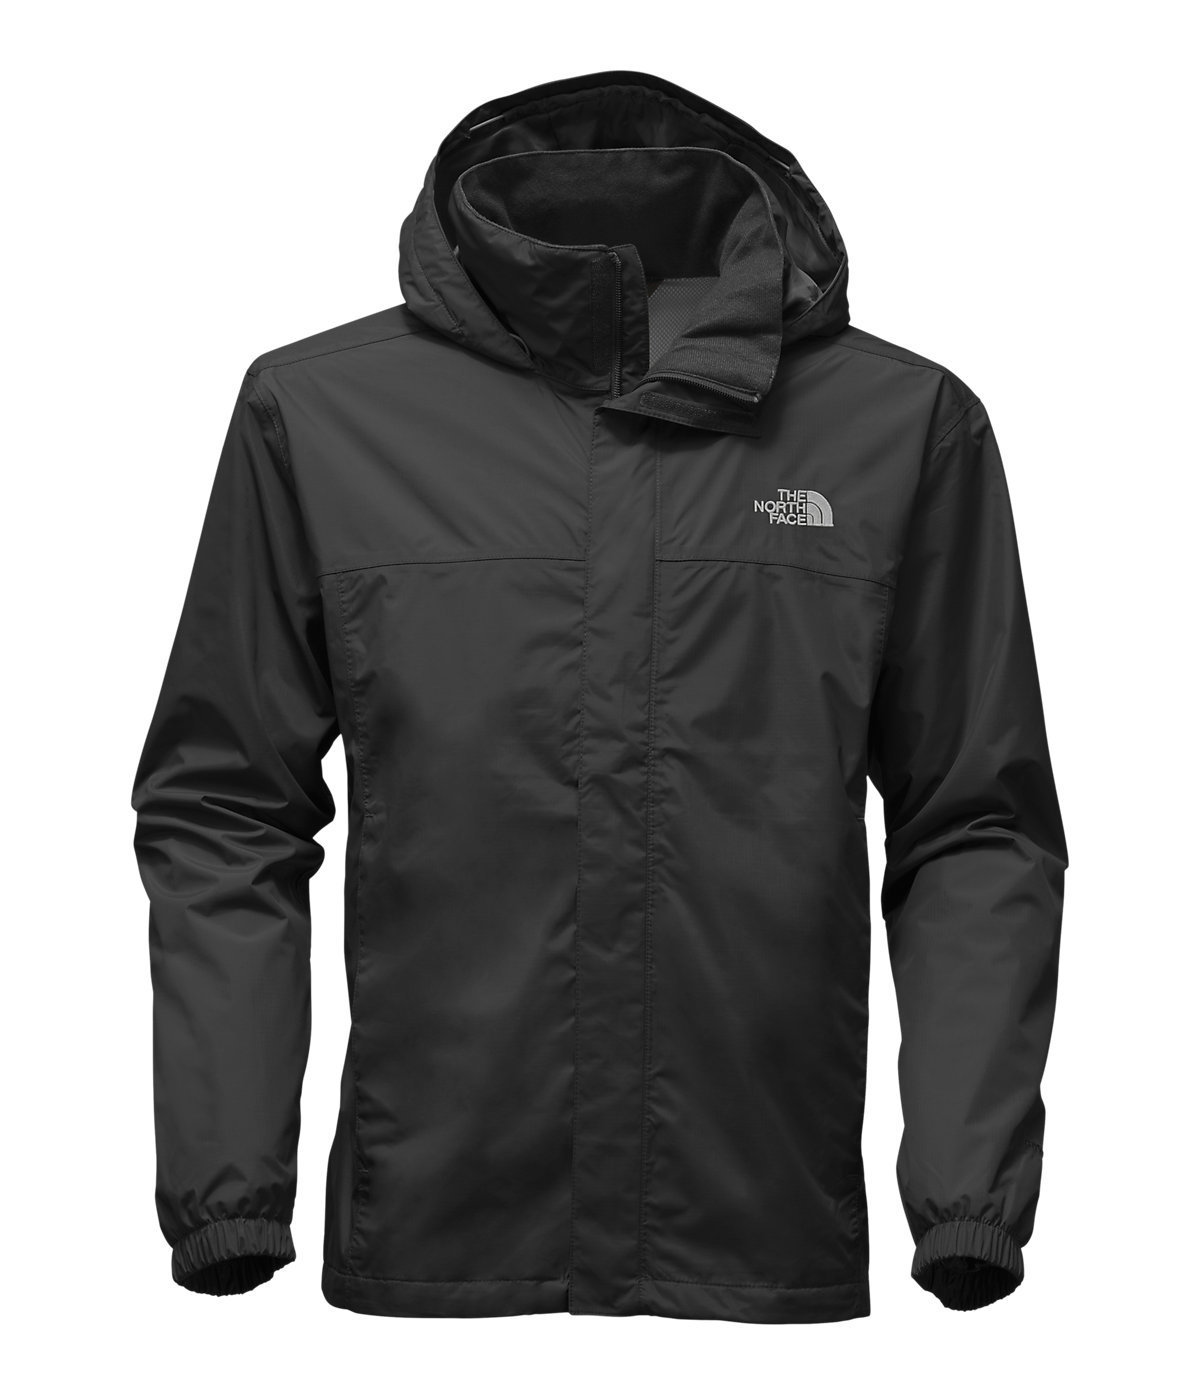 The North Face Mens Resolve 2 